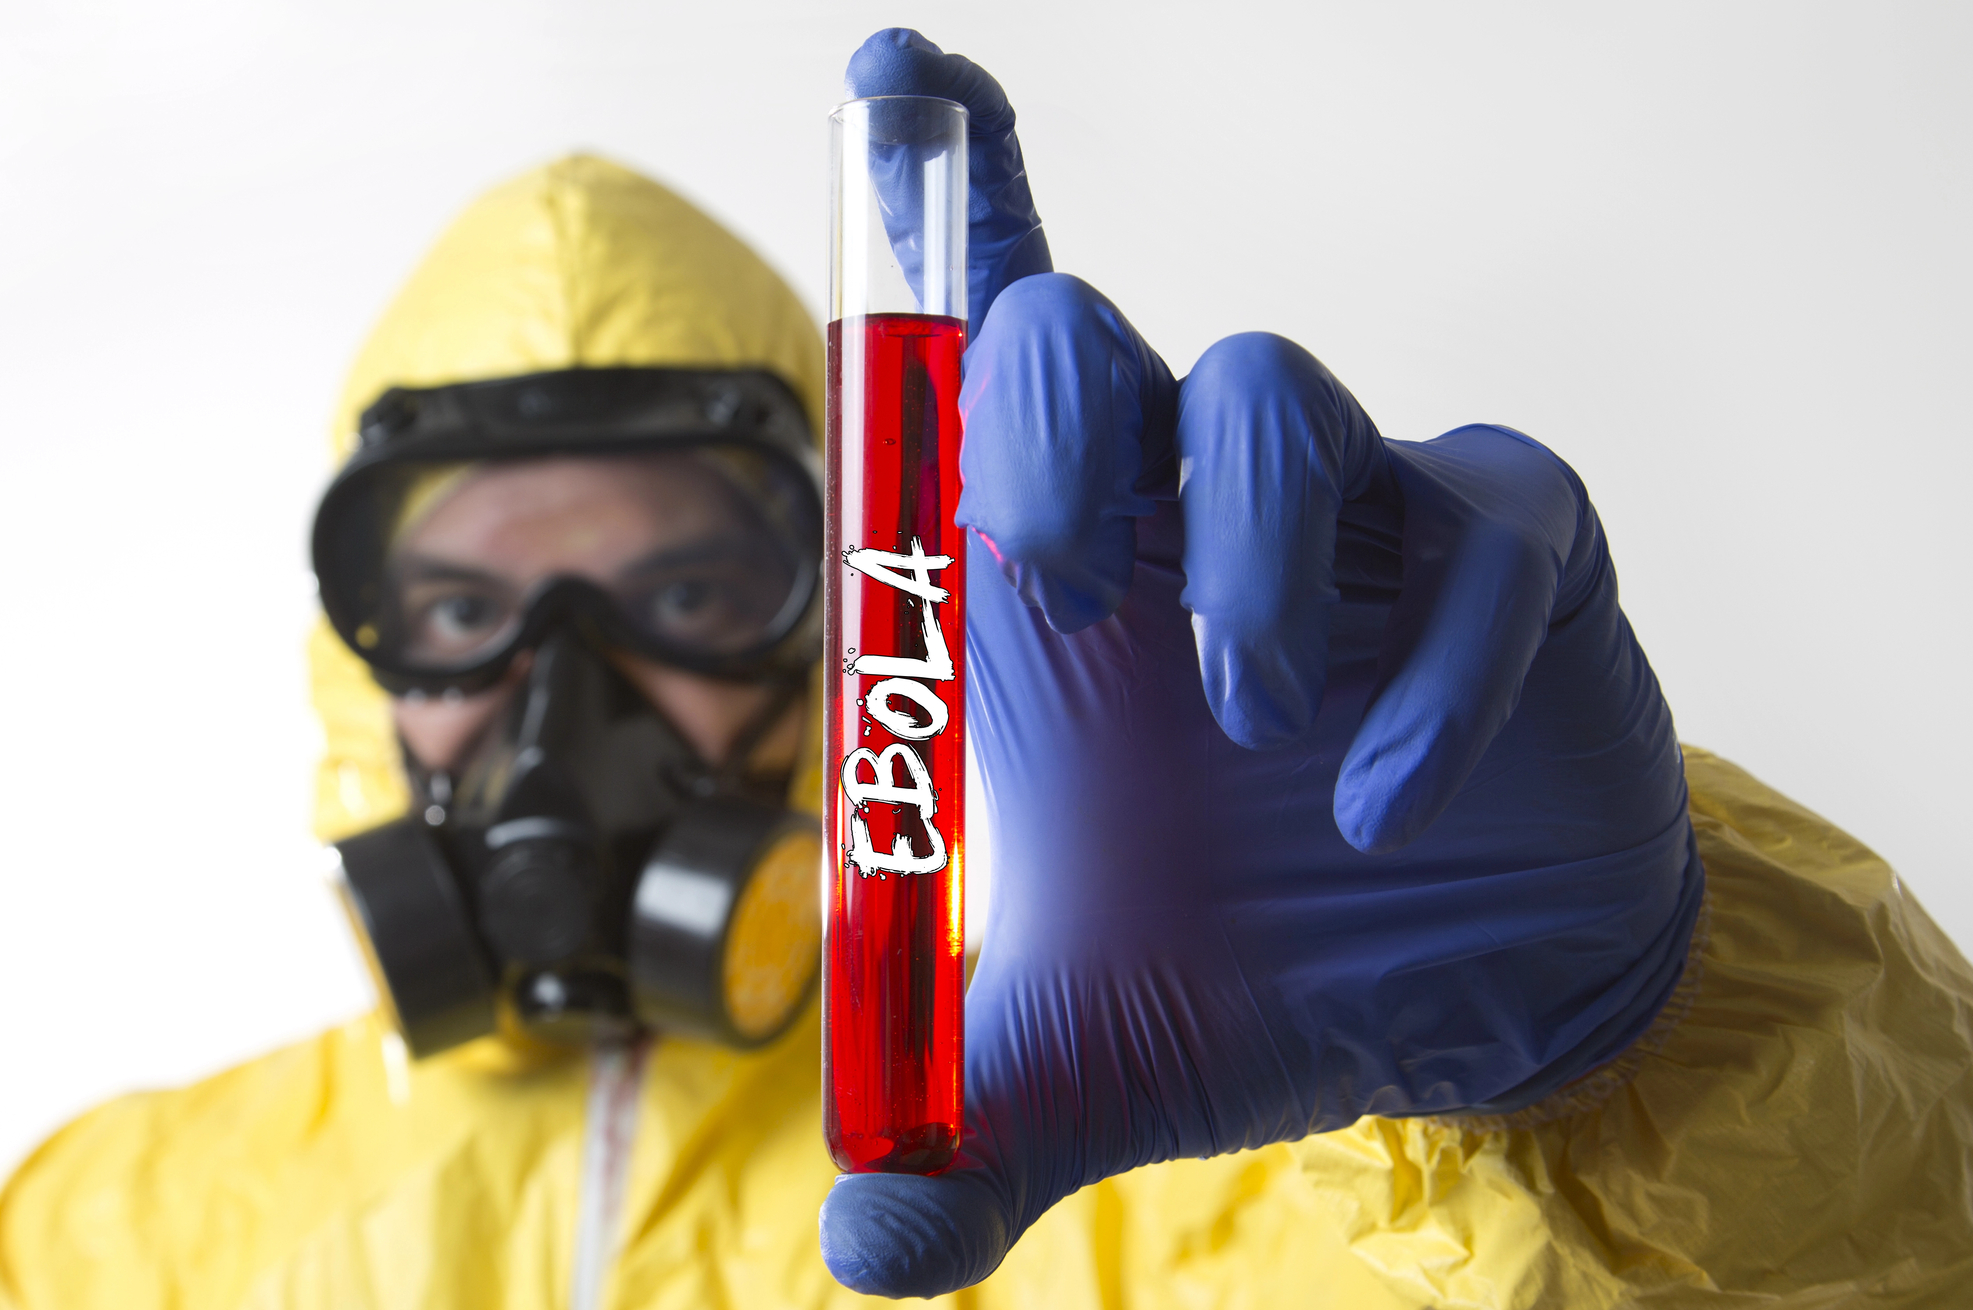 THE MADNESS CONTINUES: CHINESE SCIENTISTS CREATE MUTANT EBOLA VIRUS